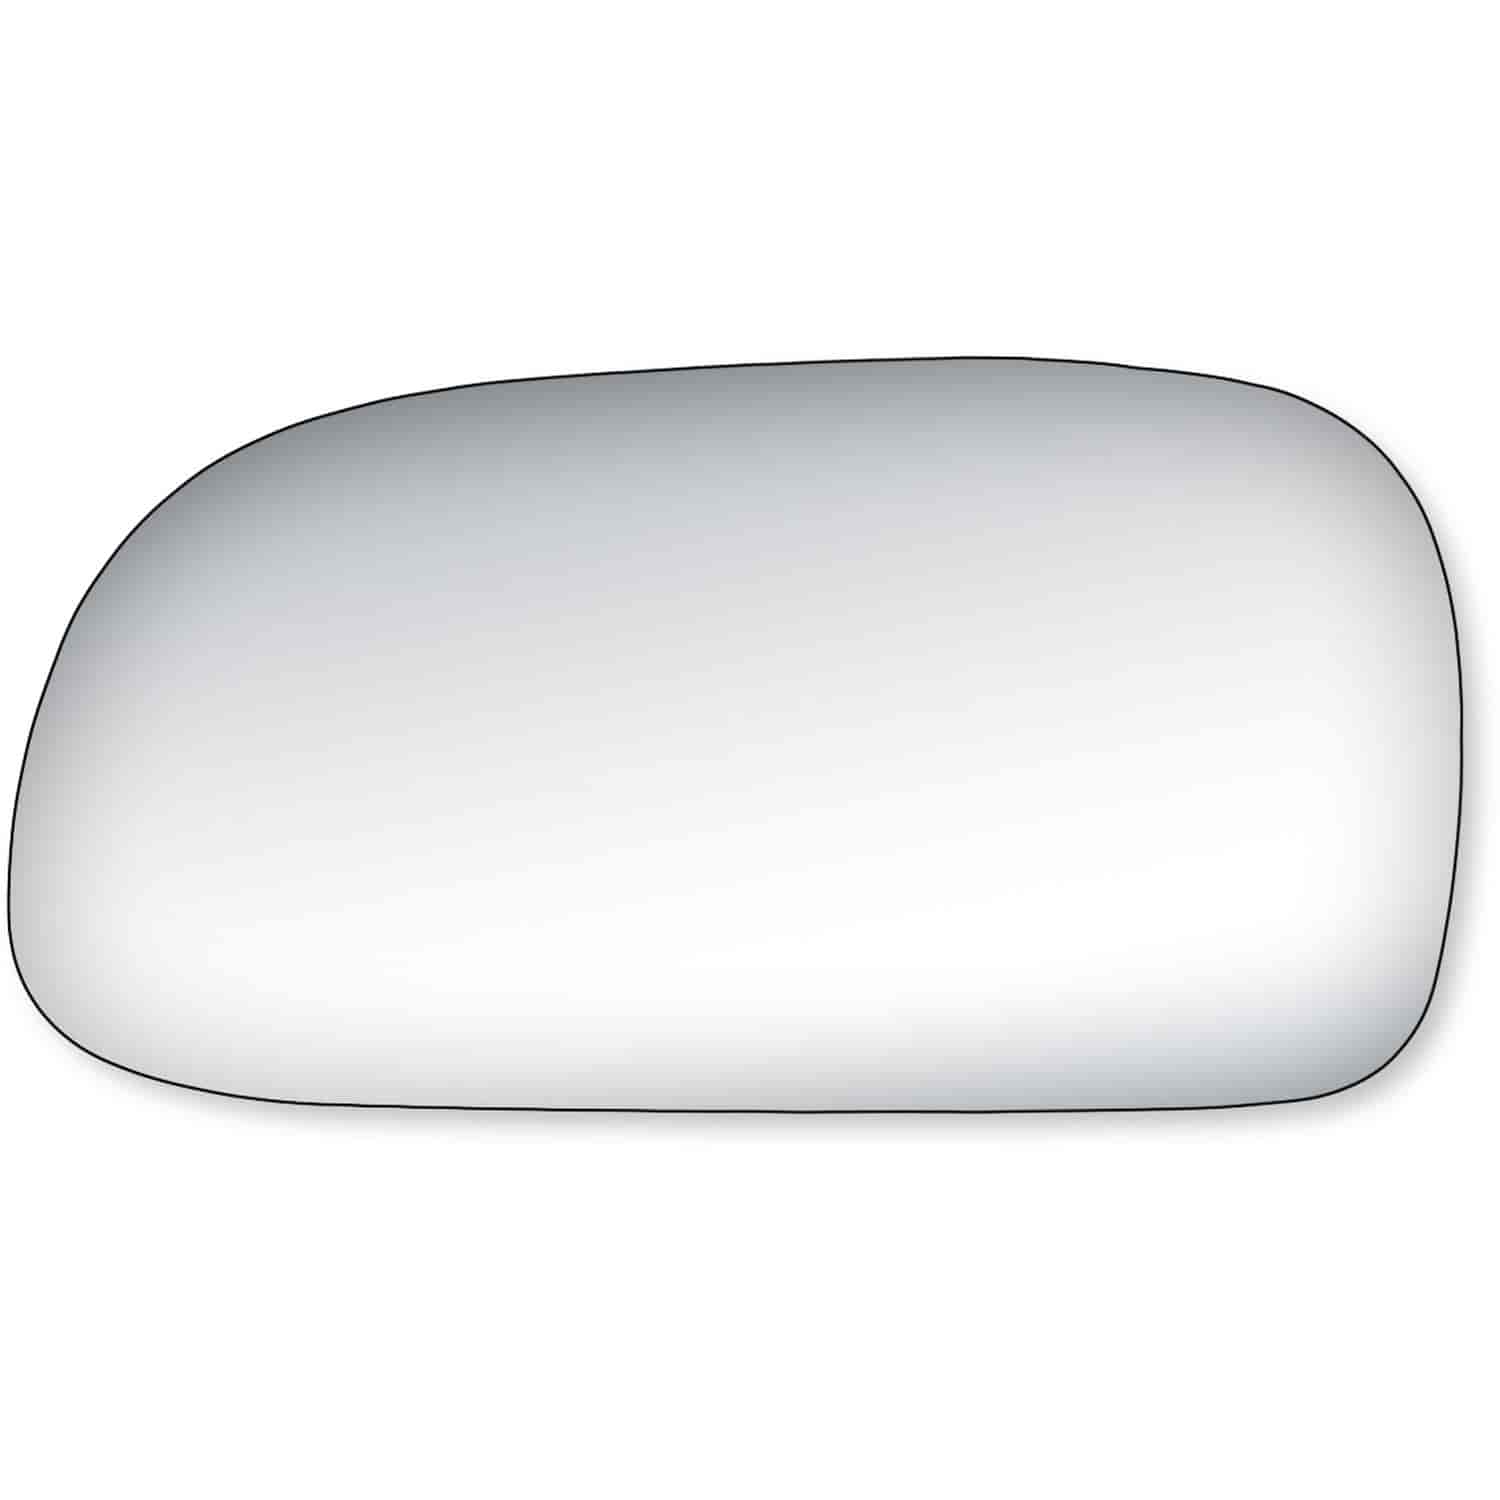 Replacement Glass for 93-97 Corolla Sedan ; 93-97 Corolla Wagon LE the glass measures 3 3/8 tall by